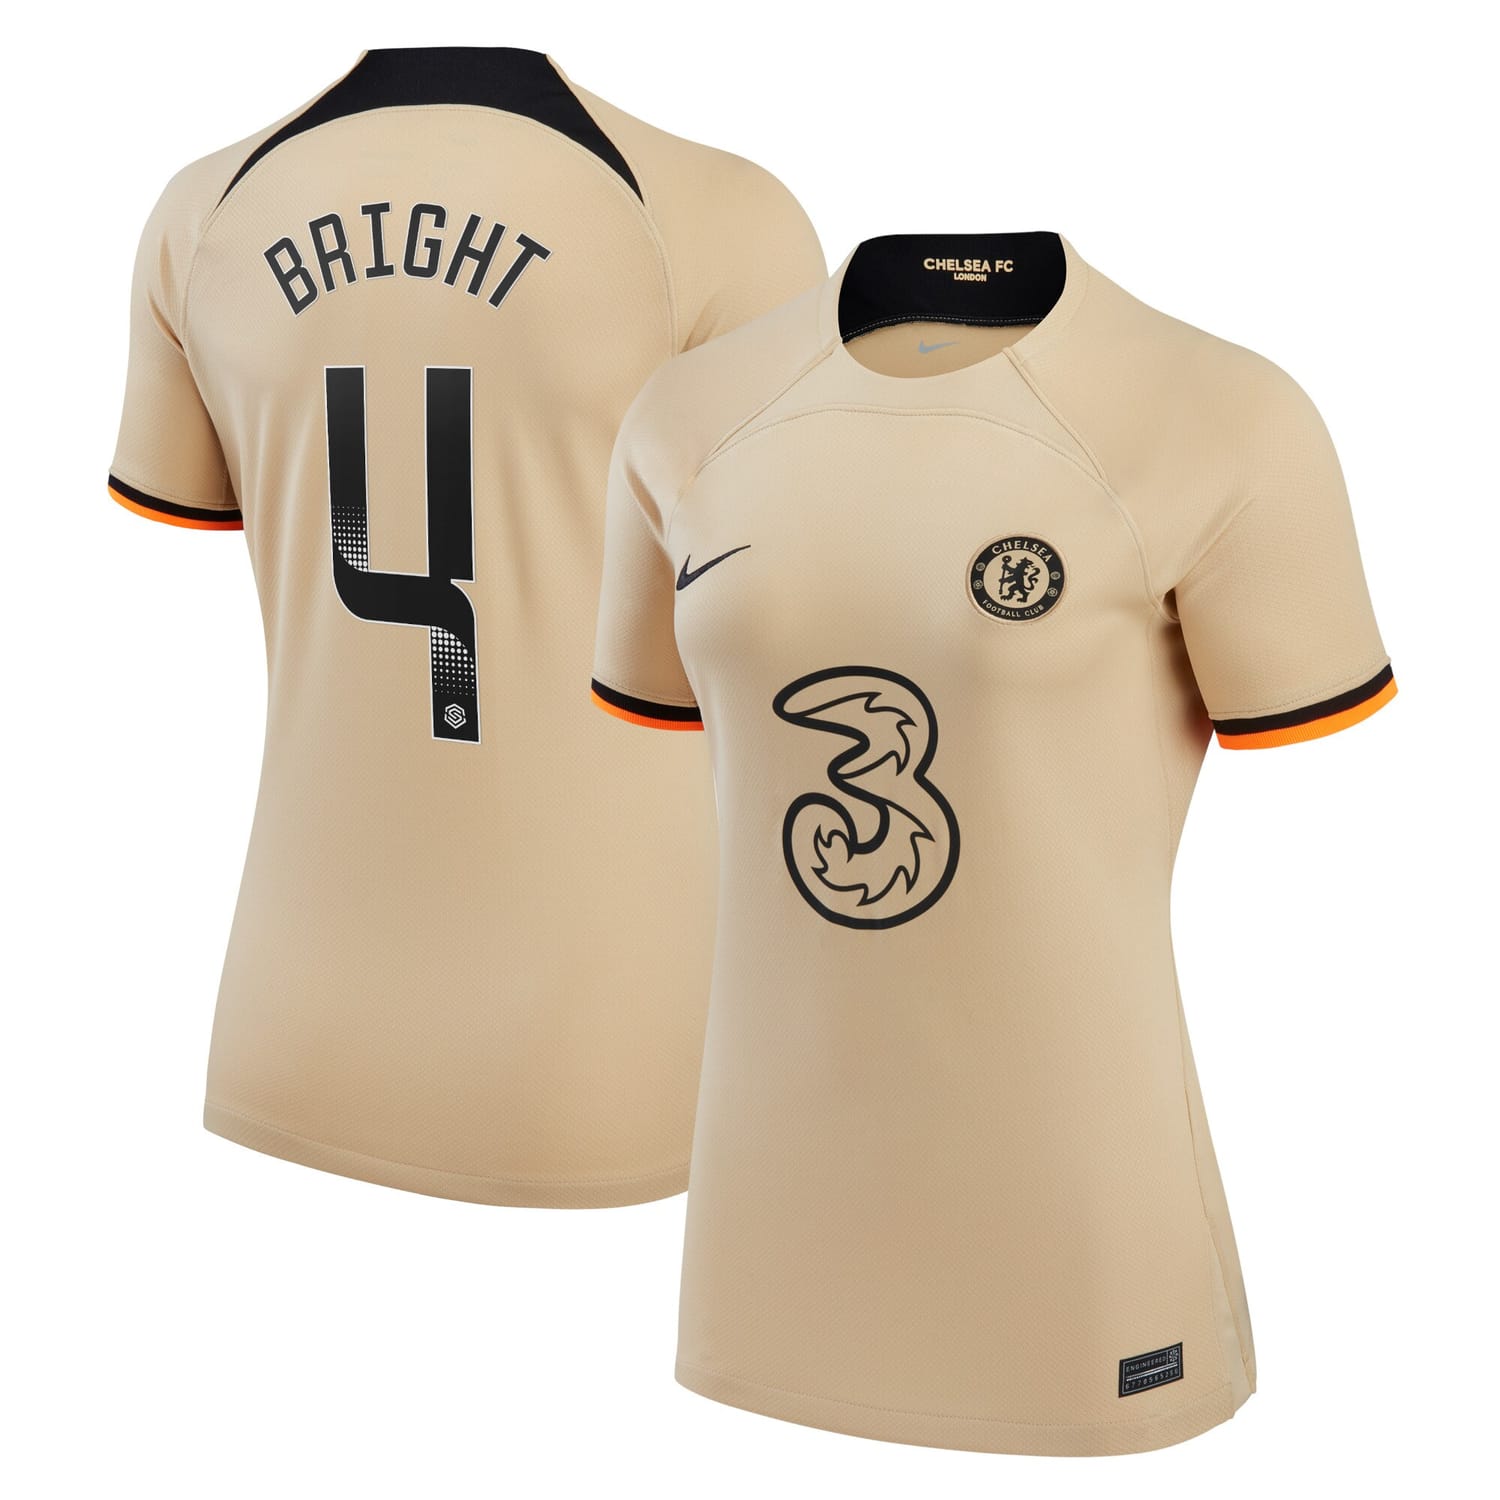 Premier League Chelsea Third WSL Jersey Shirt 2022-23 player Millie Bright 4 printing for Women